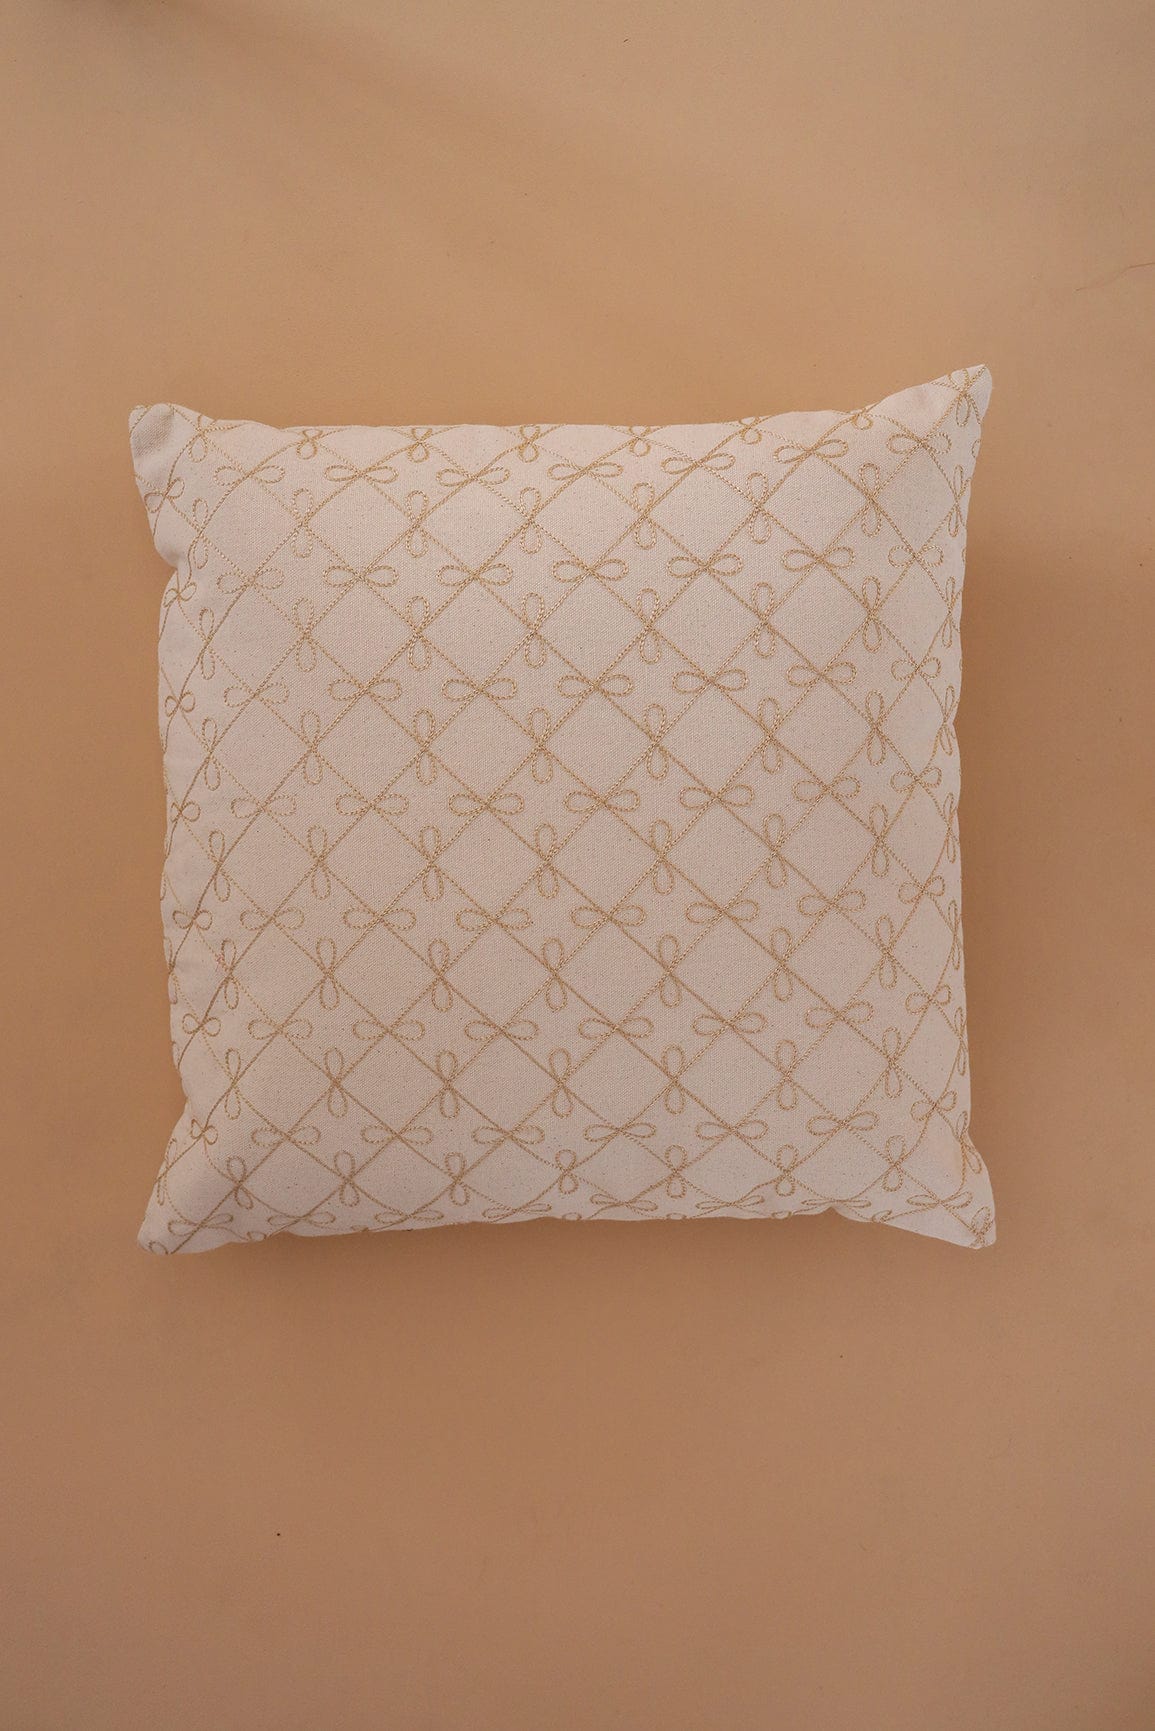 doeraa Gold Embroidery on off white cotton Cushion Cover (16*16 inches)